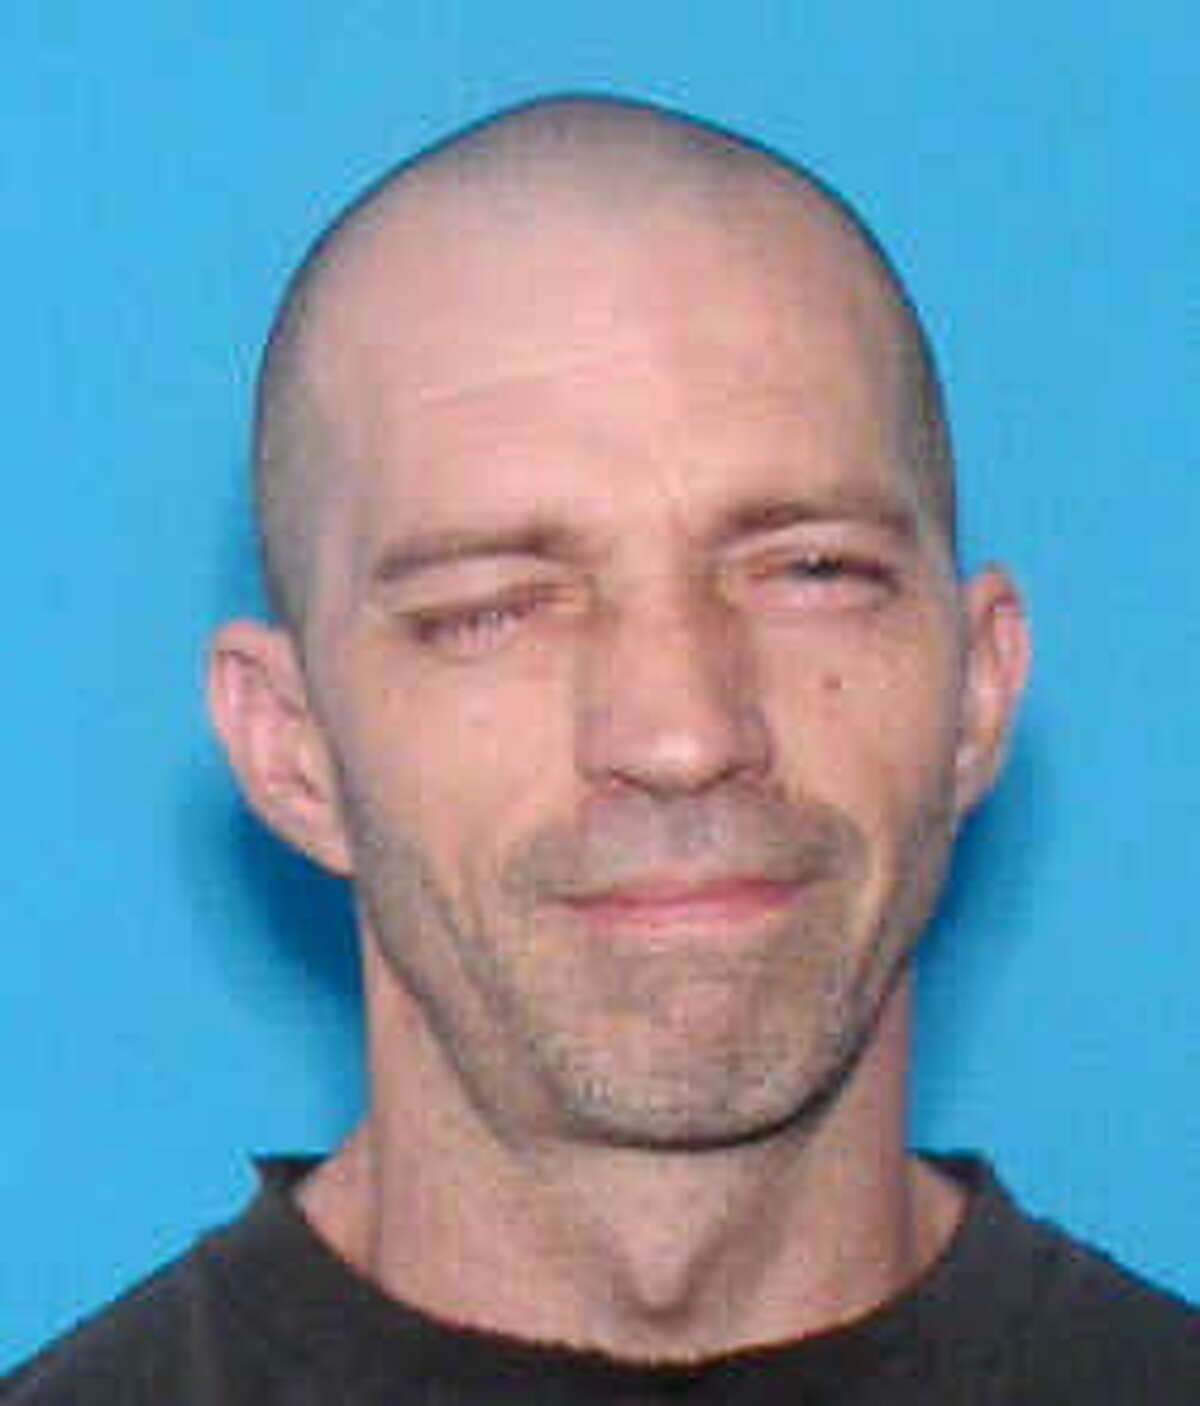 This image shows Richard Allen Ashbrook in 2017. The picture was uploaded April 11, 2019, to the National Missing and Unidentified Persons System. Human remains were recently found at a property in Pleasant Plains Township where Ashbrook was last living.